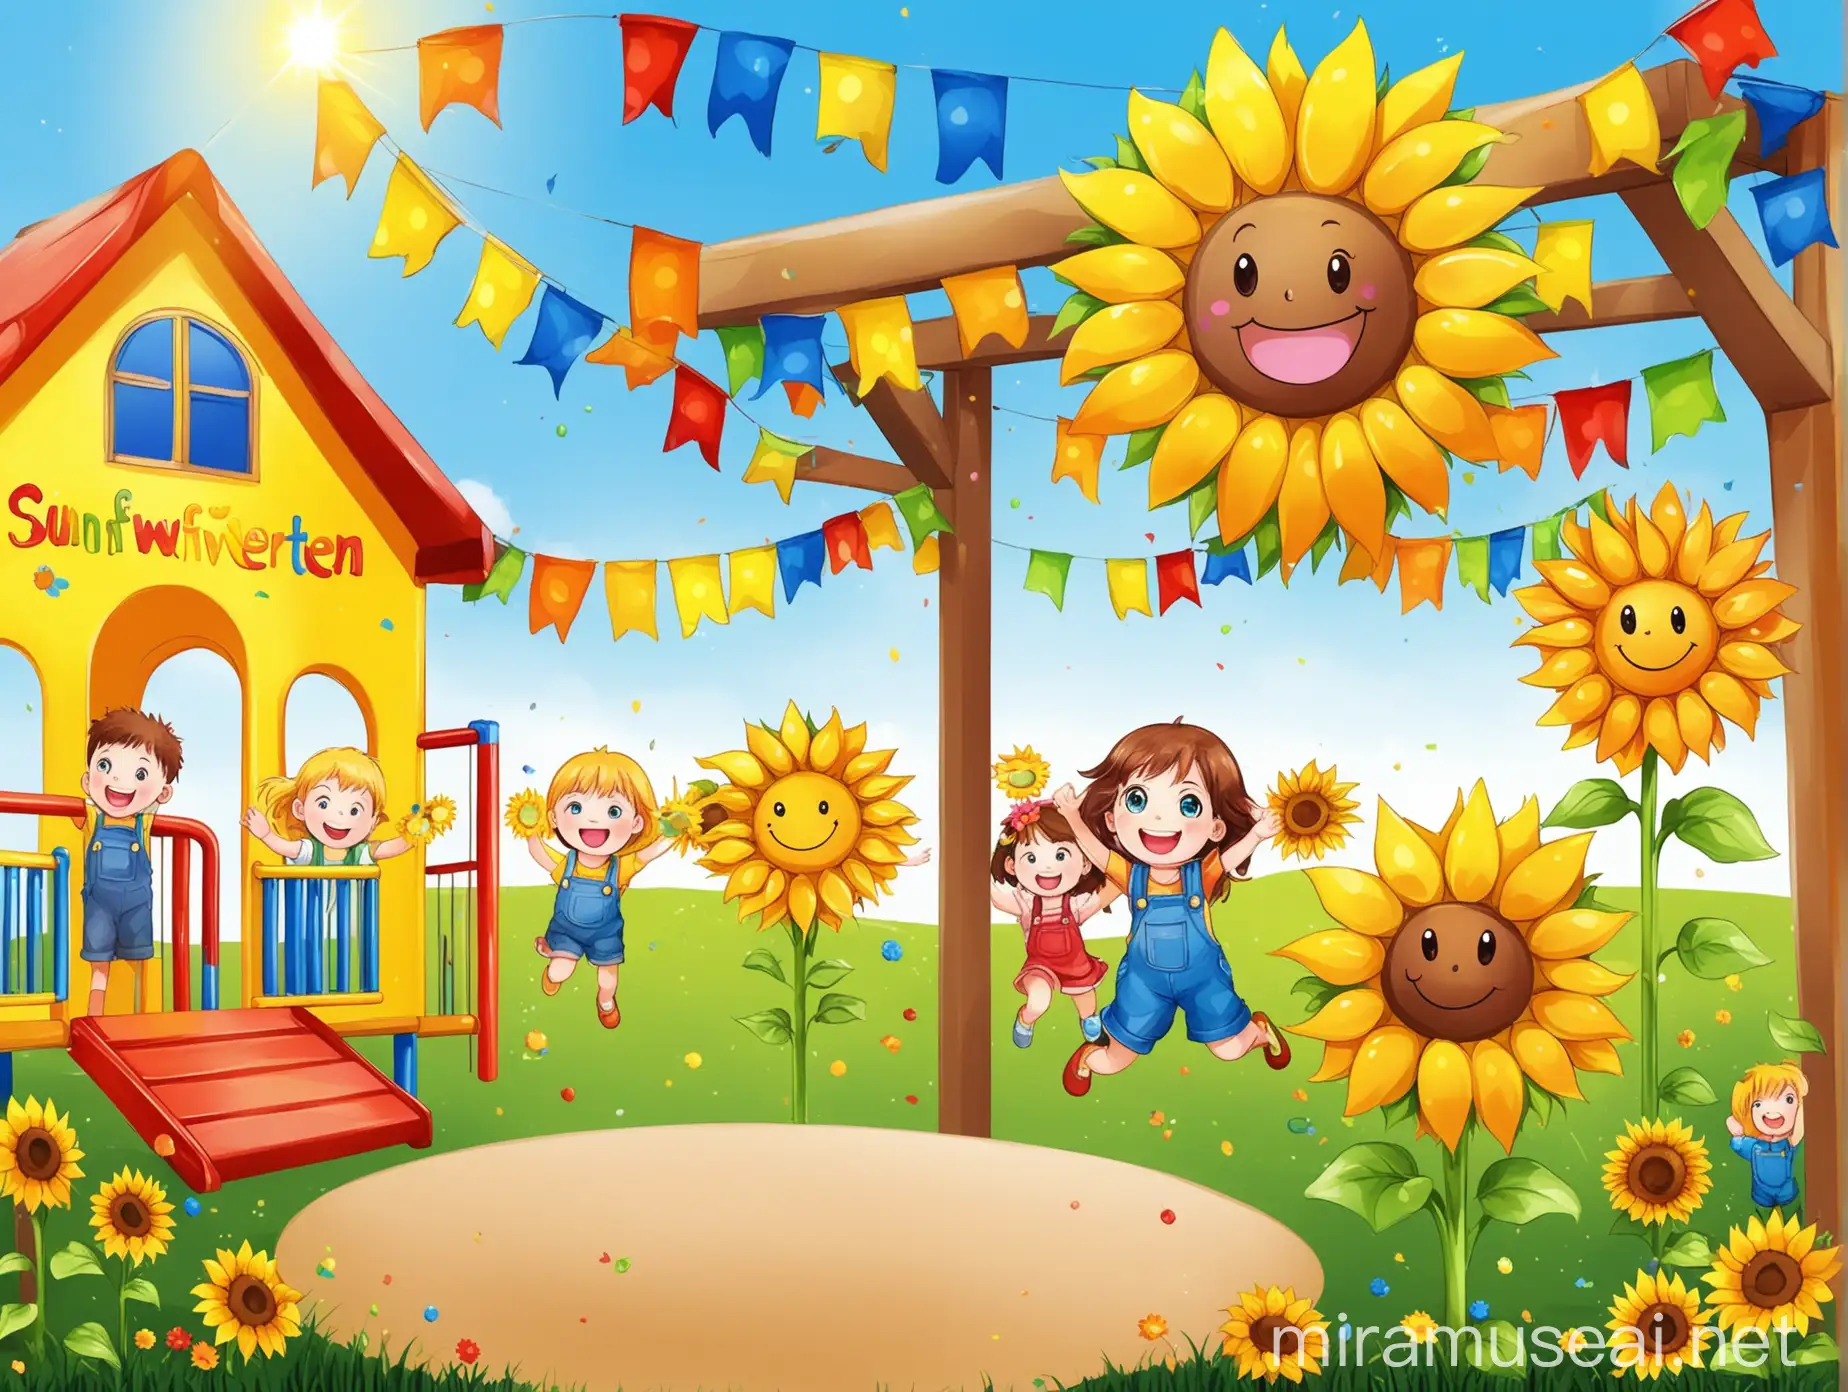 Create a vibrant and cheerful banner for a kindergarten with the theme "Sunflowers". The banner should feature large, bright sunflowers with smiling faces, surrounded by happy children playing and laughing. Include elements like colorful flowers, green grass, and a clear blue sky. The overall design should be engaging, fun, and welcoming, evoking a sense of warmth and happiness. Ensure the style is bright and colorful, suitable for a playful and joyful environment on children's playground verandas.